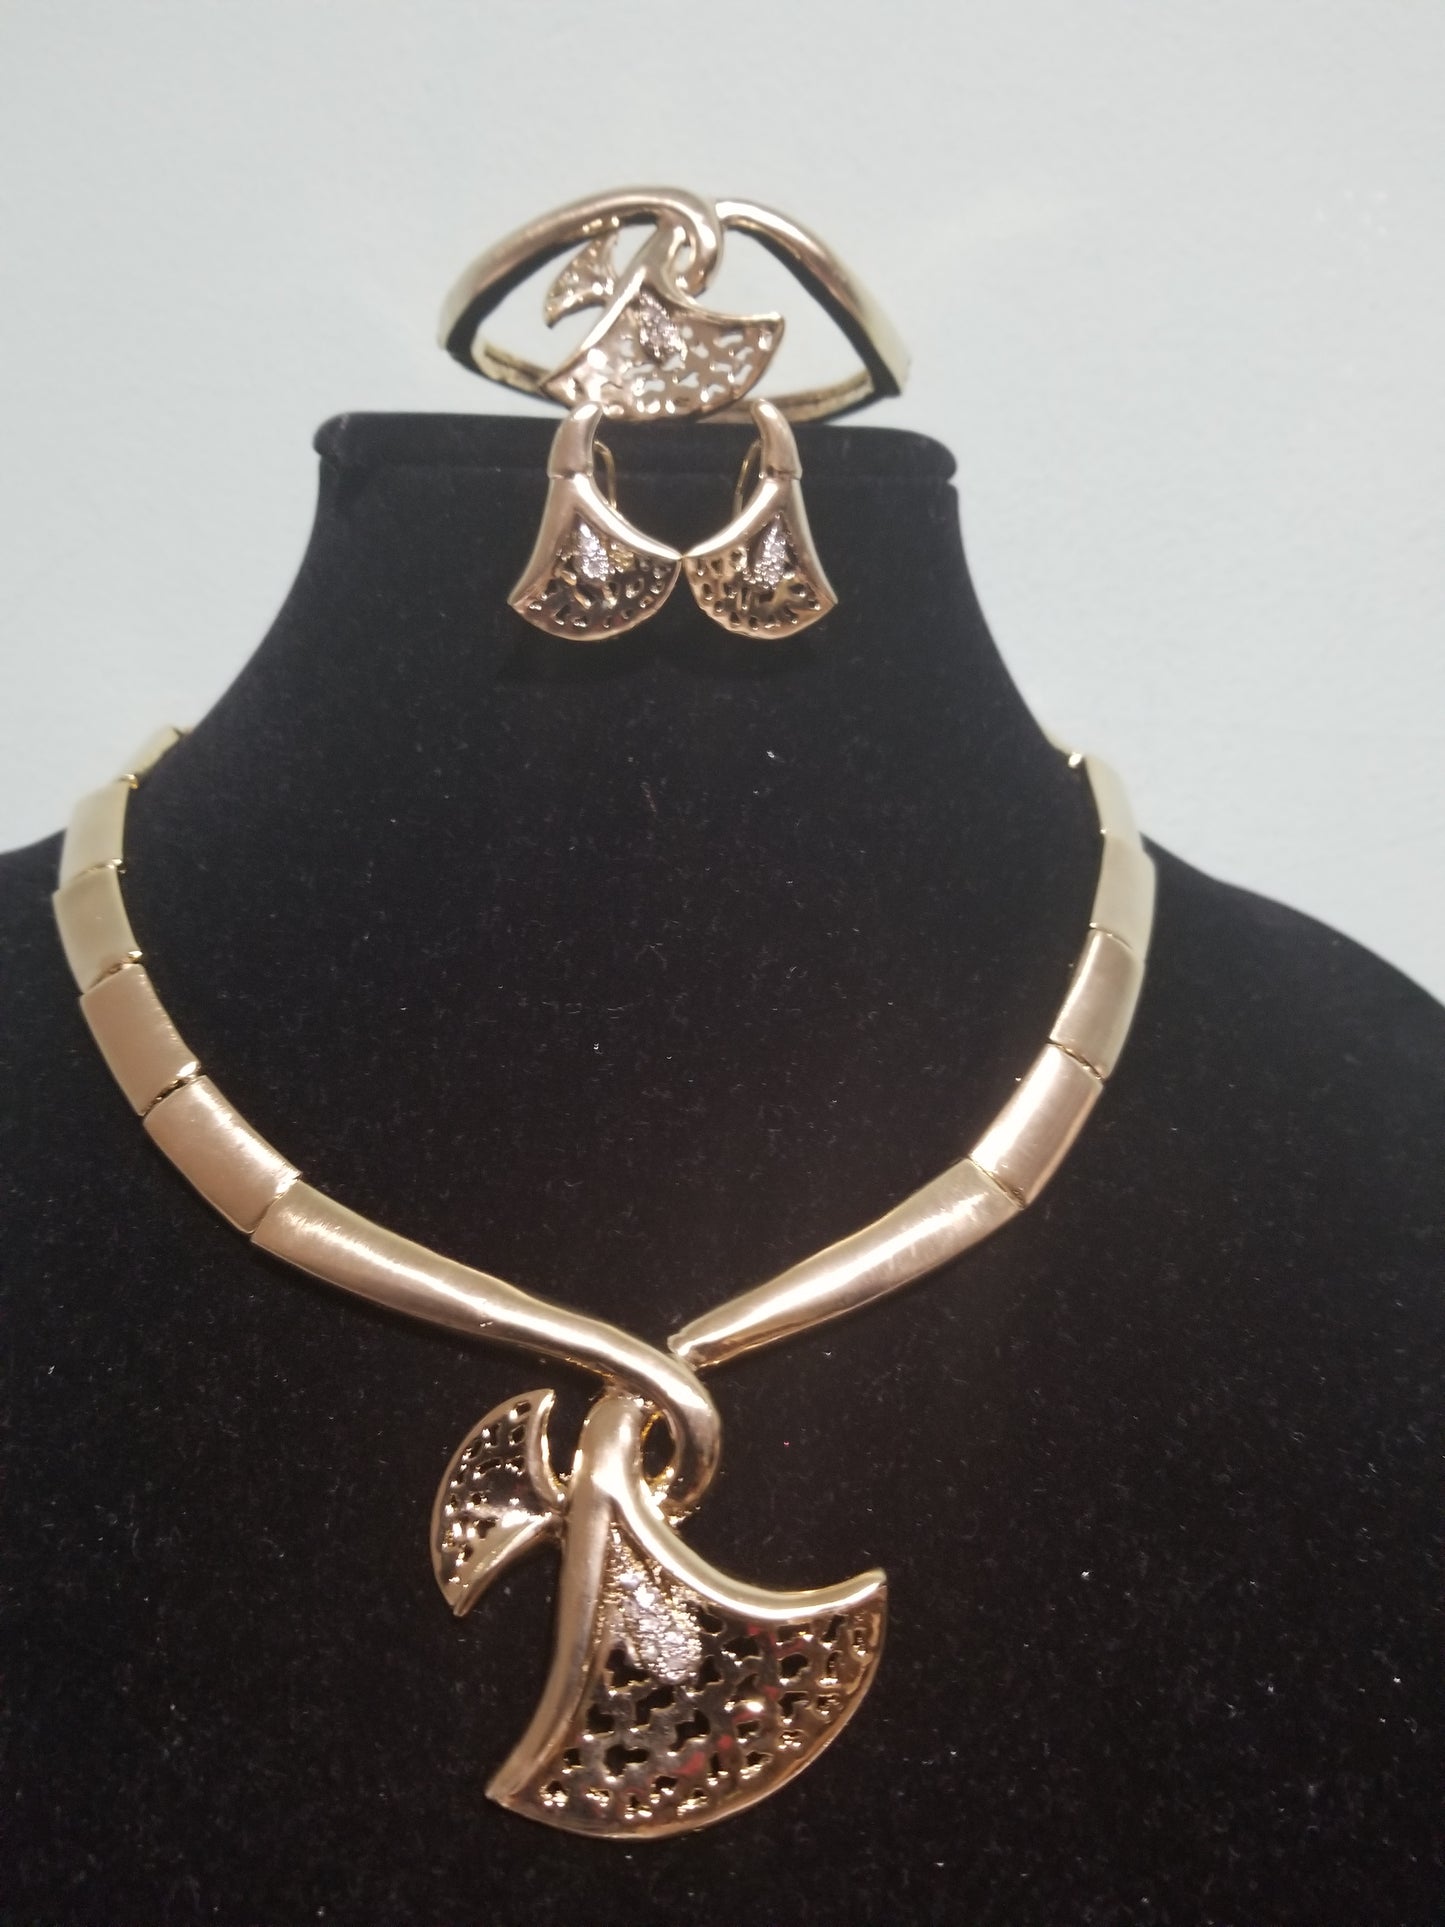 Clearance: 18k high quality Gold plating Dubai Jewelry set. 4piece necklace, earrings, bangle,  ring set. African party Jewelry set. Quality, hypoallergenic necklaces with open ring